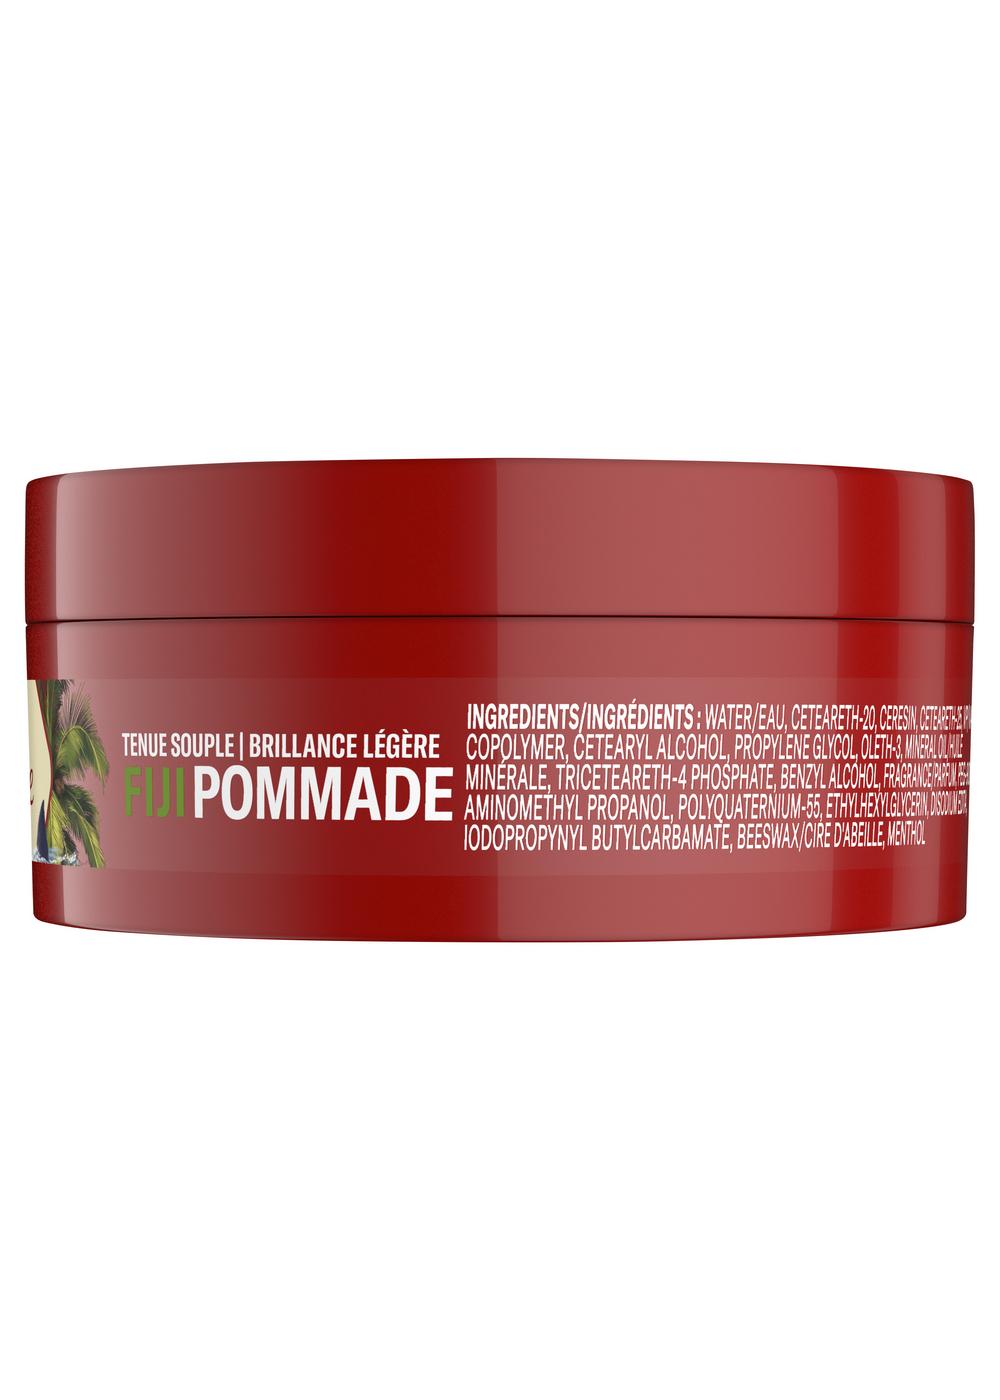 Old Spice Fiji Hair Styling Pomade for Men; image 3 of 9